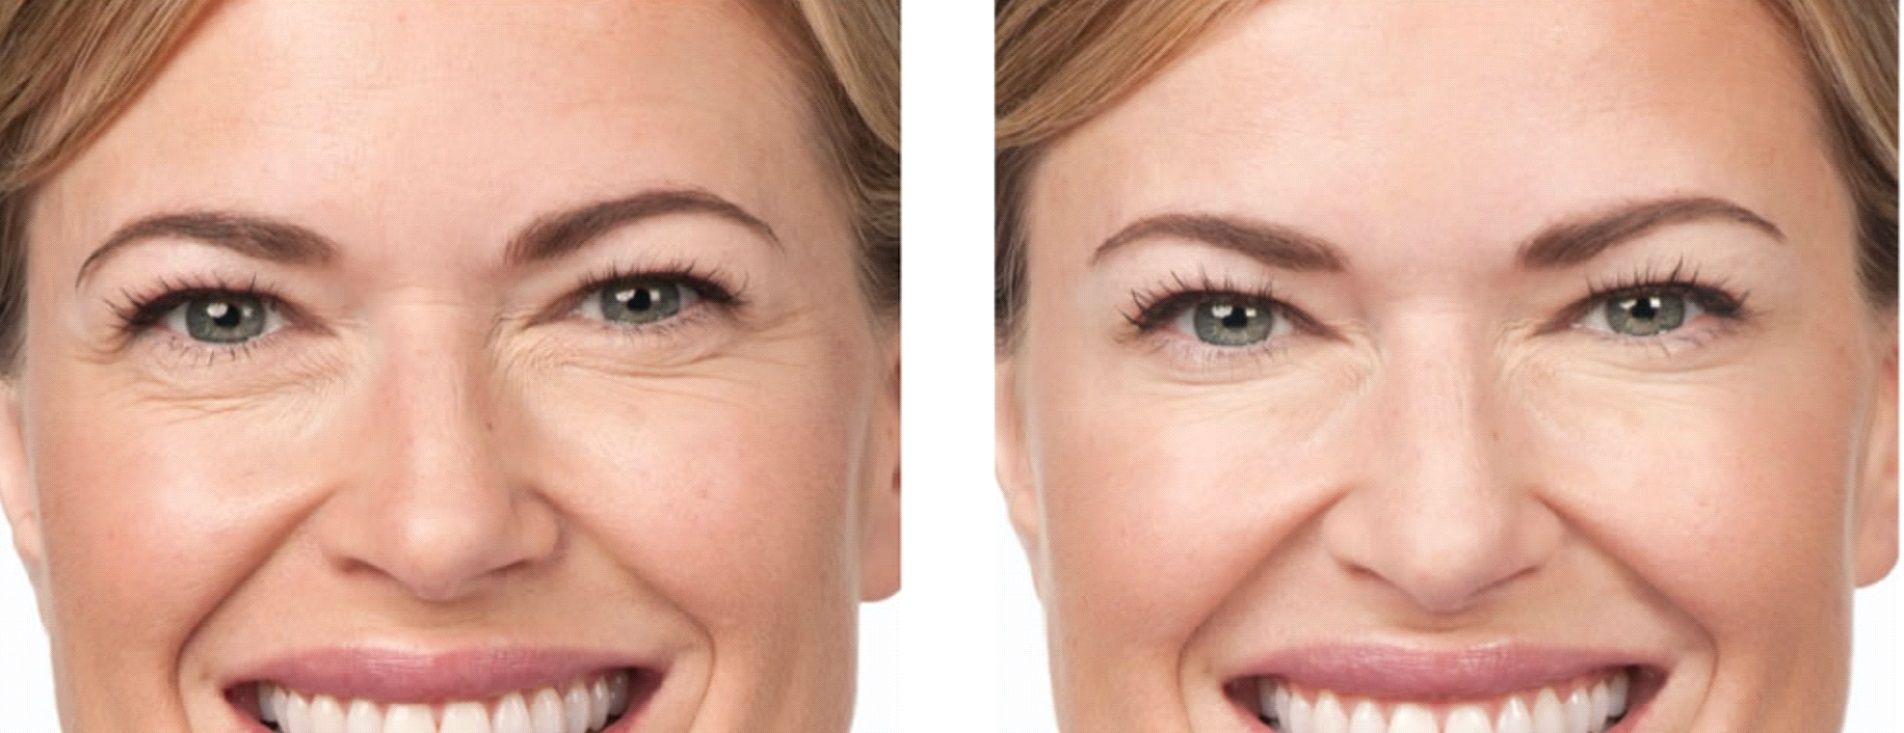 Female patient before and after Botox for crow's feet treatment